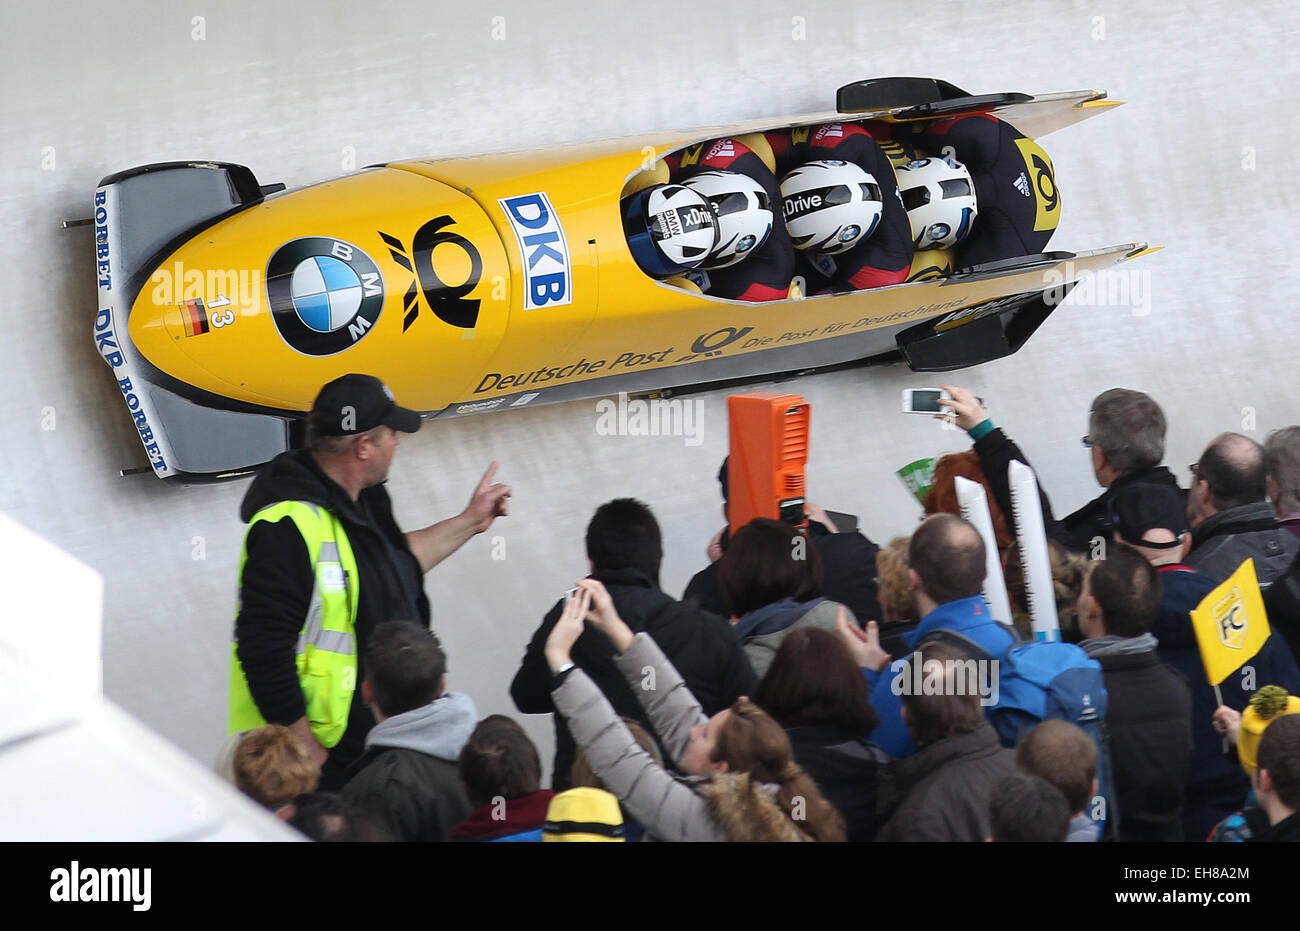 Winterberg, Germany. 08th Mar, 2015. Bobsleigh pilot Francesco Friedrich and his pushers Candy Bauer, Martin Grothkopp and Thorsten Margis of the Germany in action during the Bobsleigh and Skeleton World Championships 2015 in Winterberg, Germany, 08 March 2015. Photo: Ina Fassbender/dpa/Alamy Live News Stock Photo